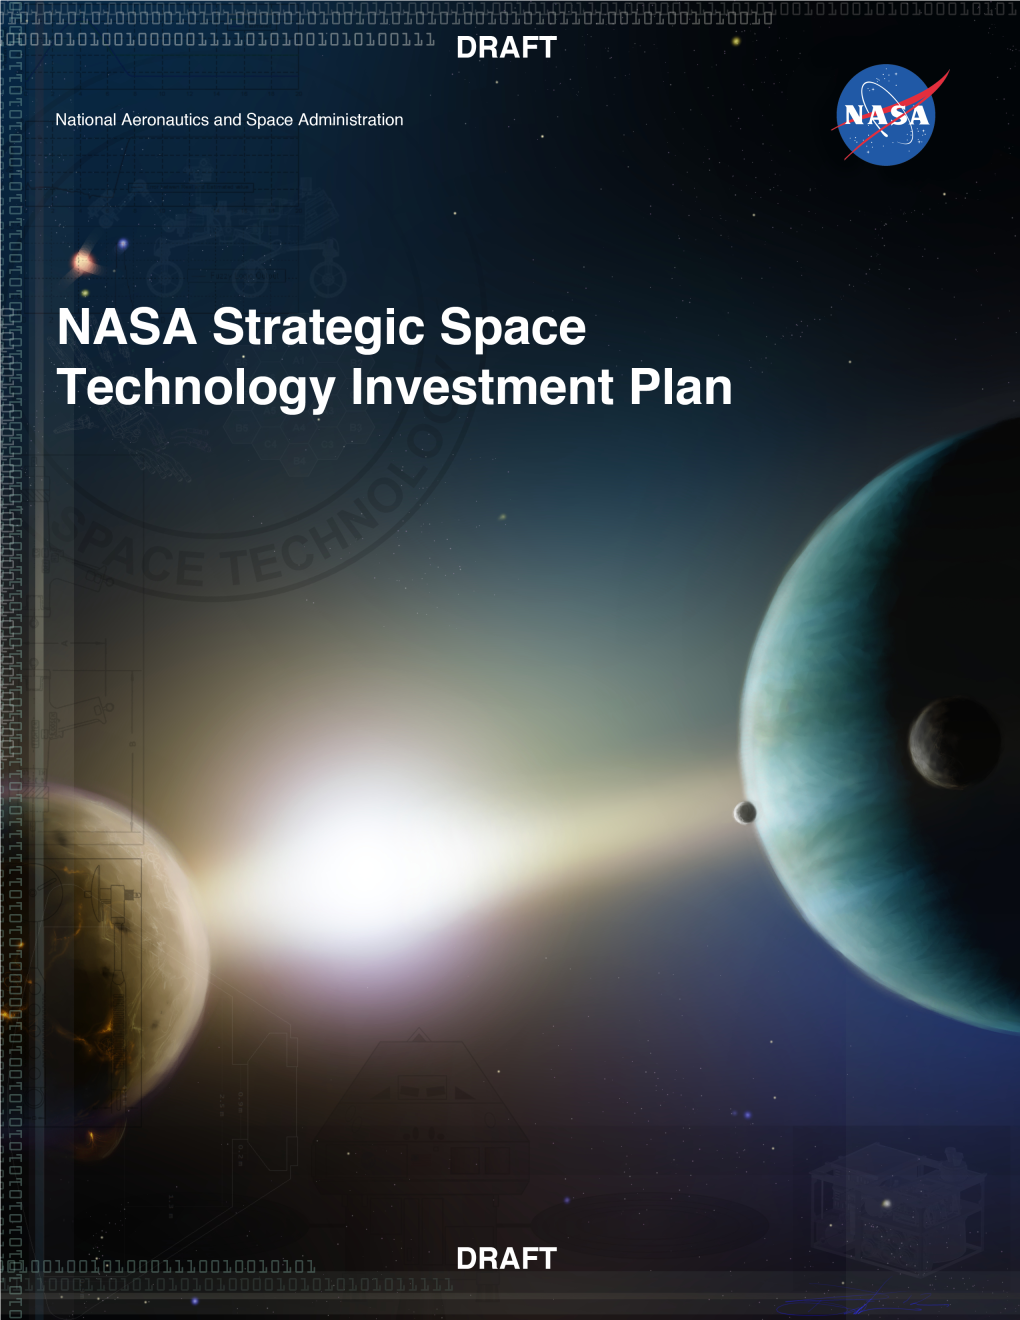 Strategic Space Technology Investment Plan